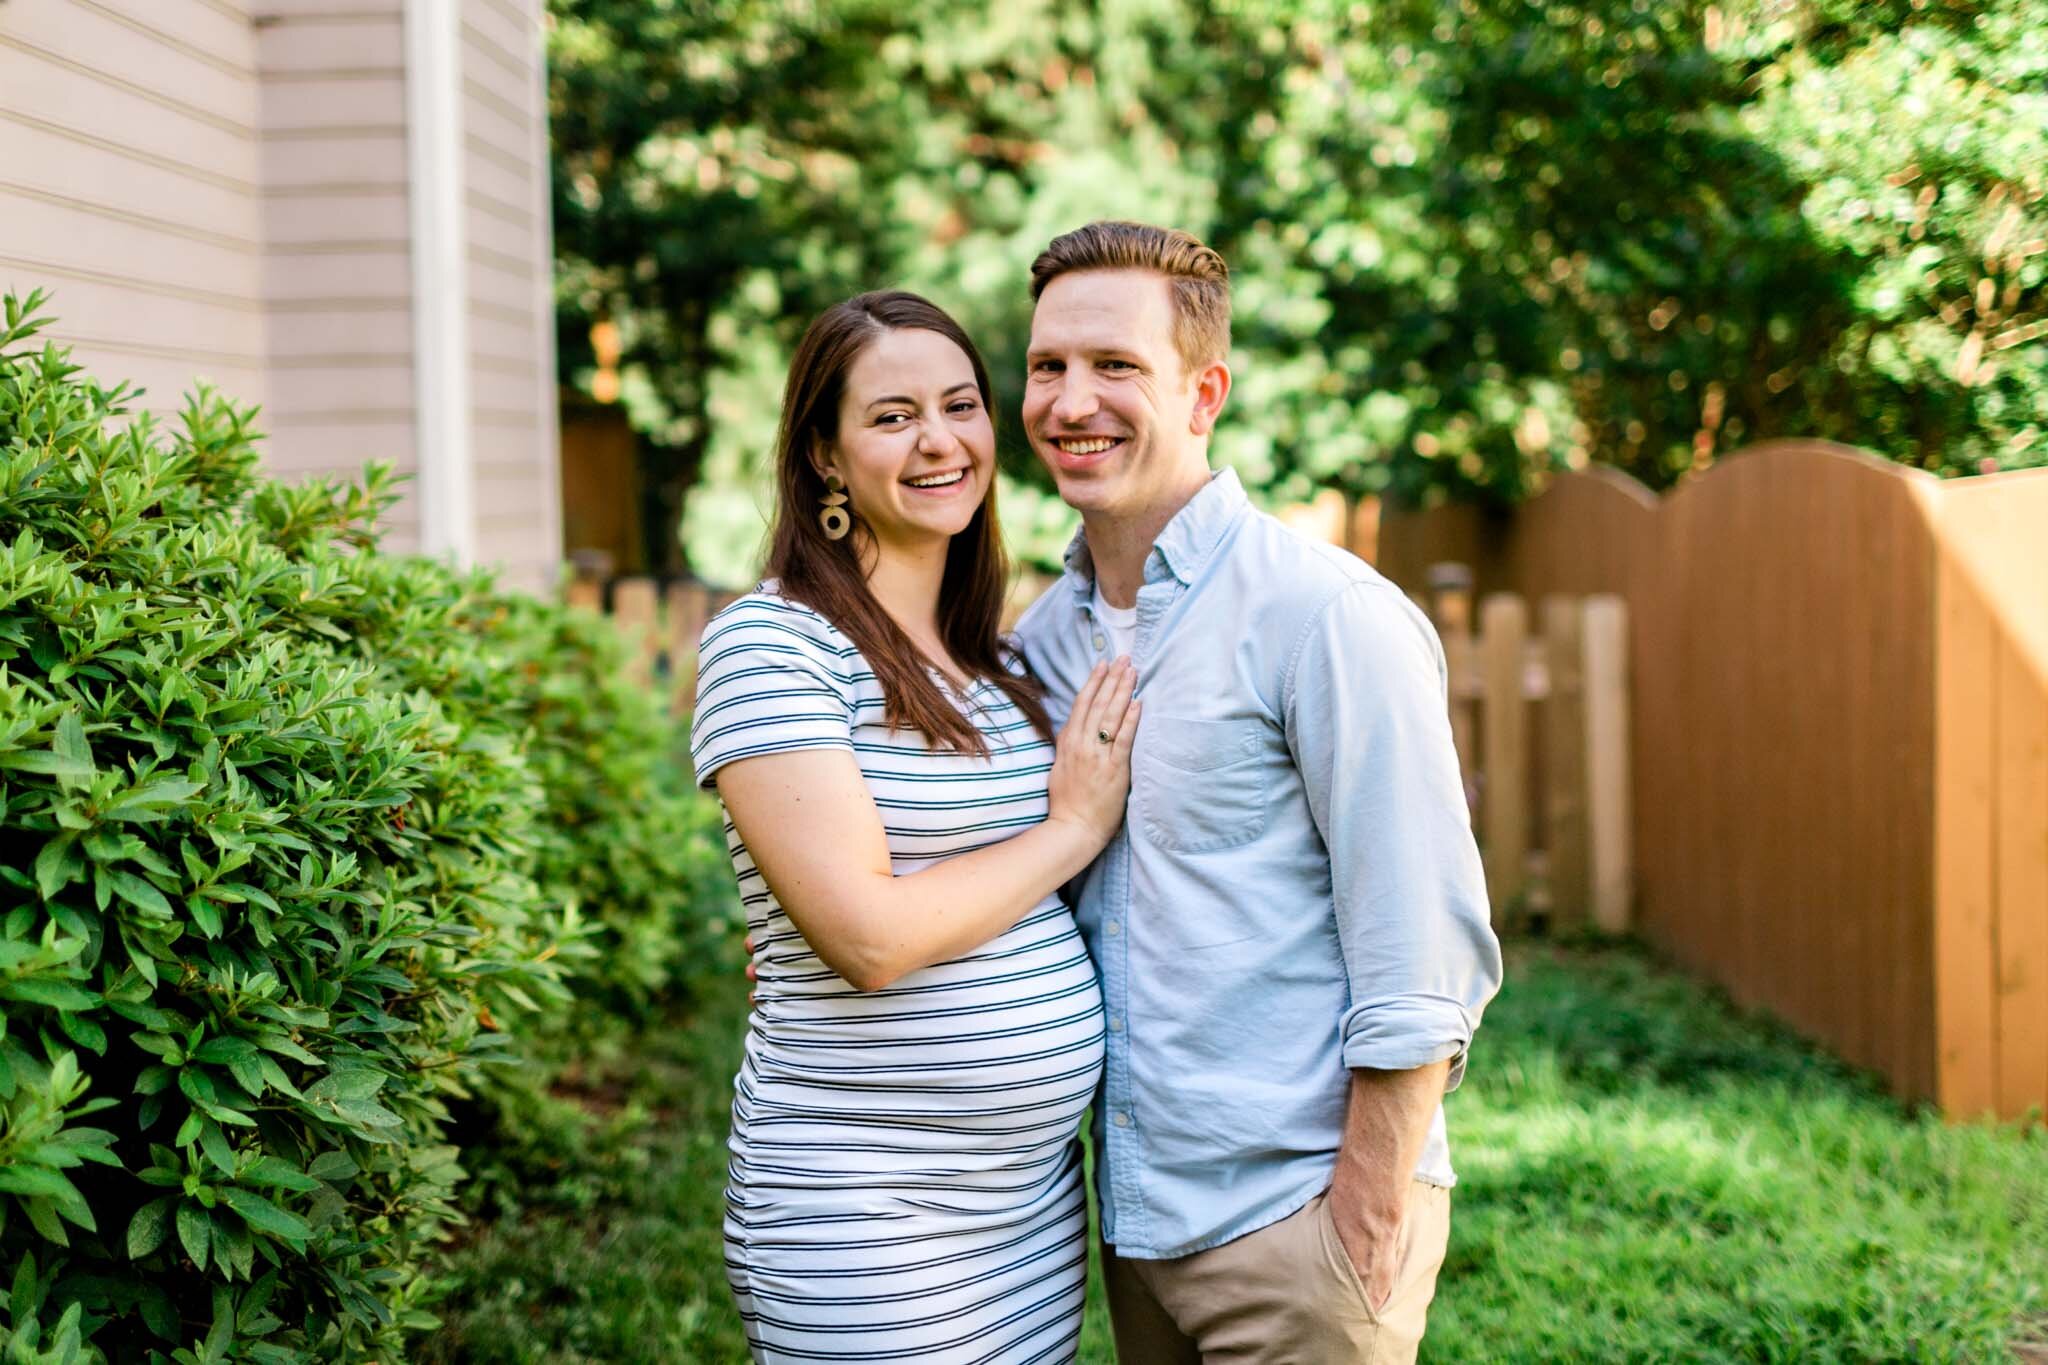 Durham Maternity Photographer | By G. Lin Photography | Beautiful candid maternity photo of couple outside